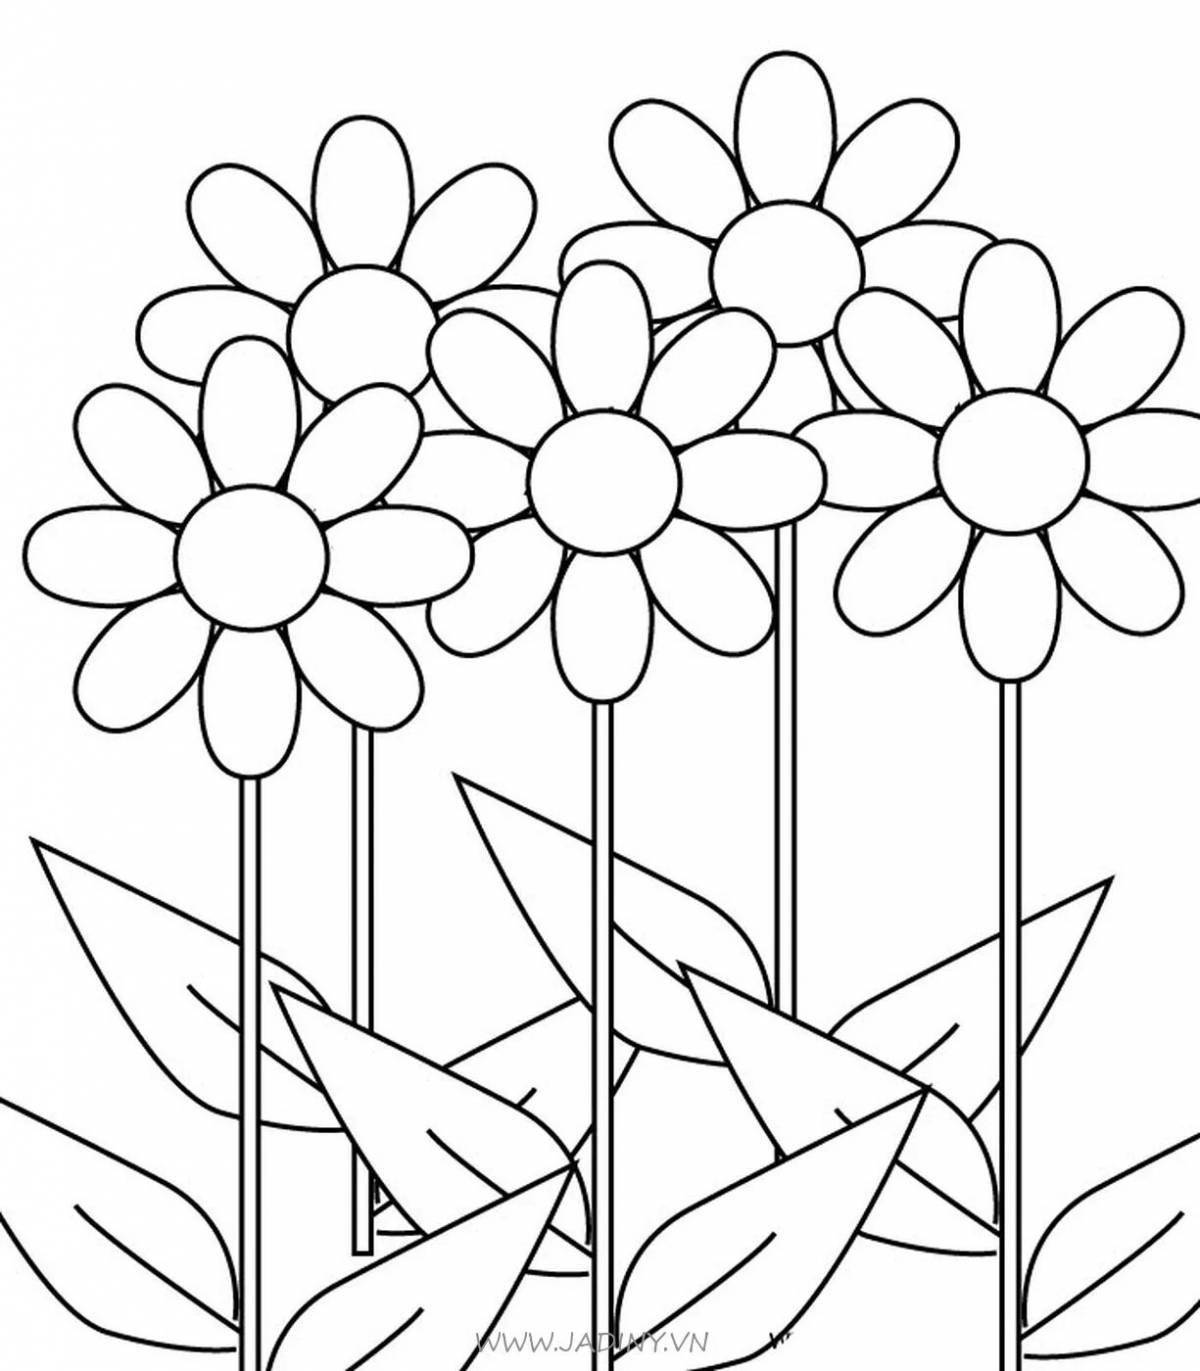 Gorgeous flower coloring book for toddlers 2 3 years old